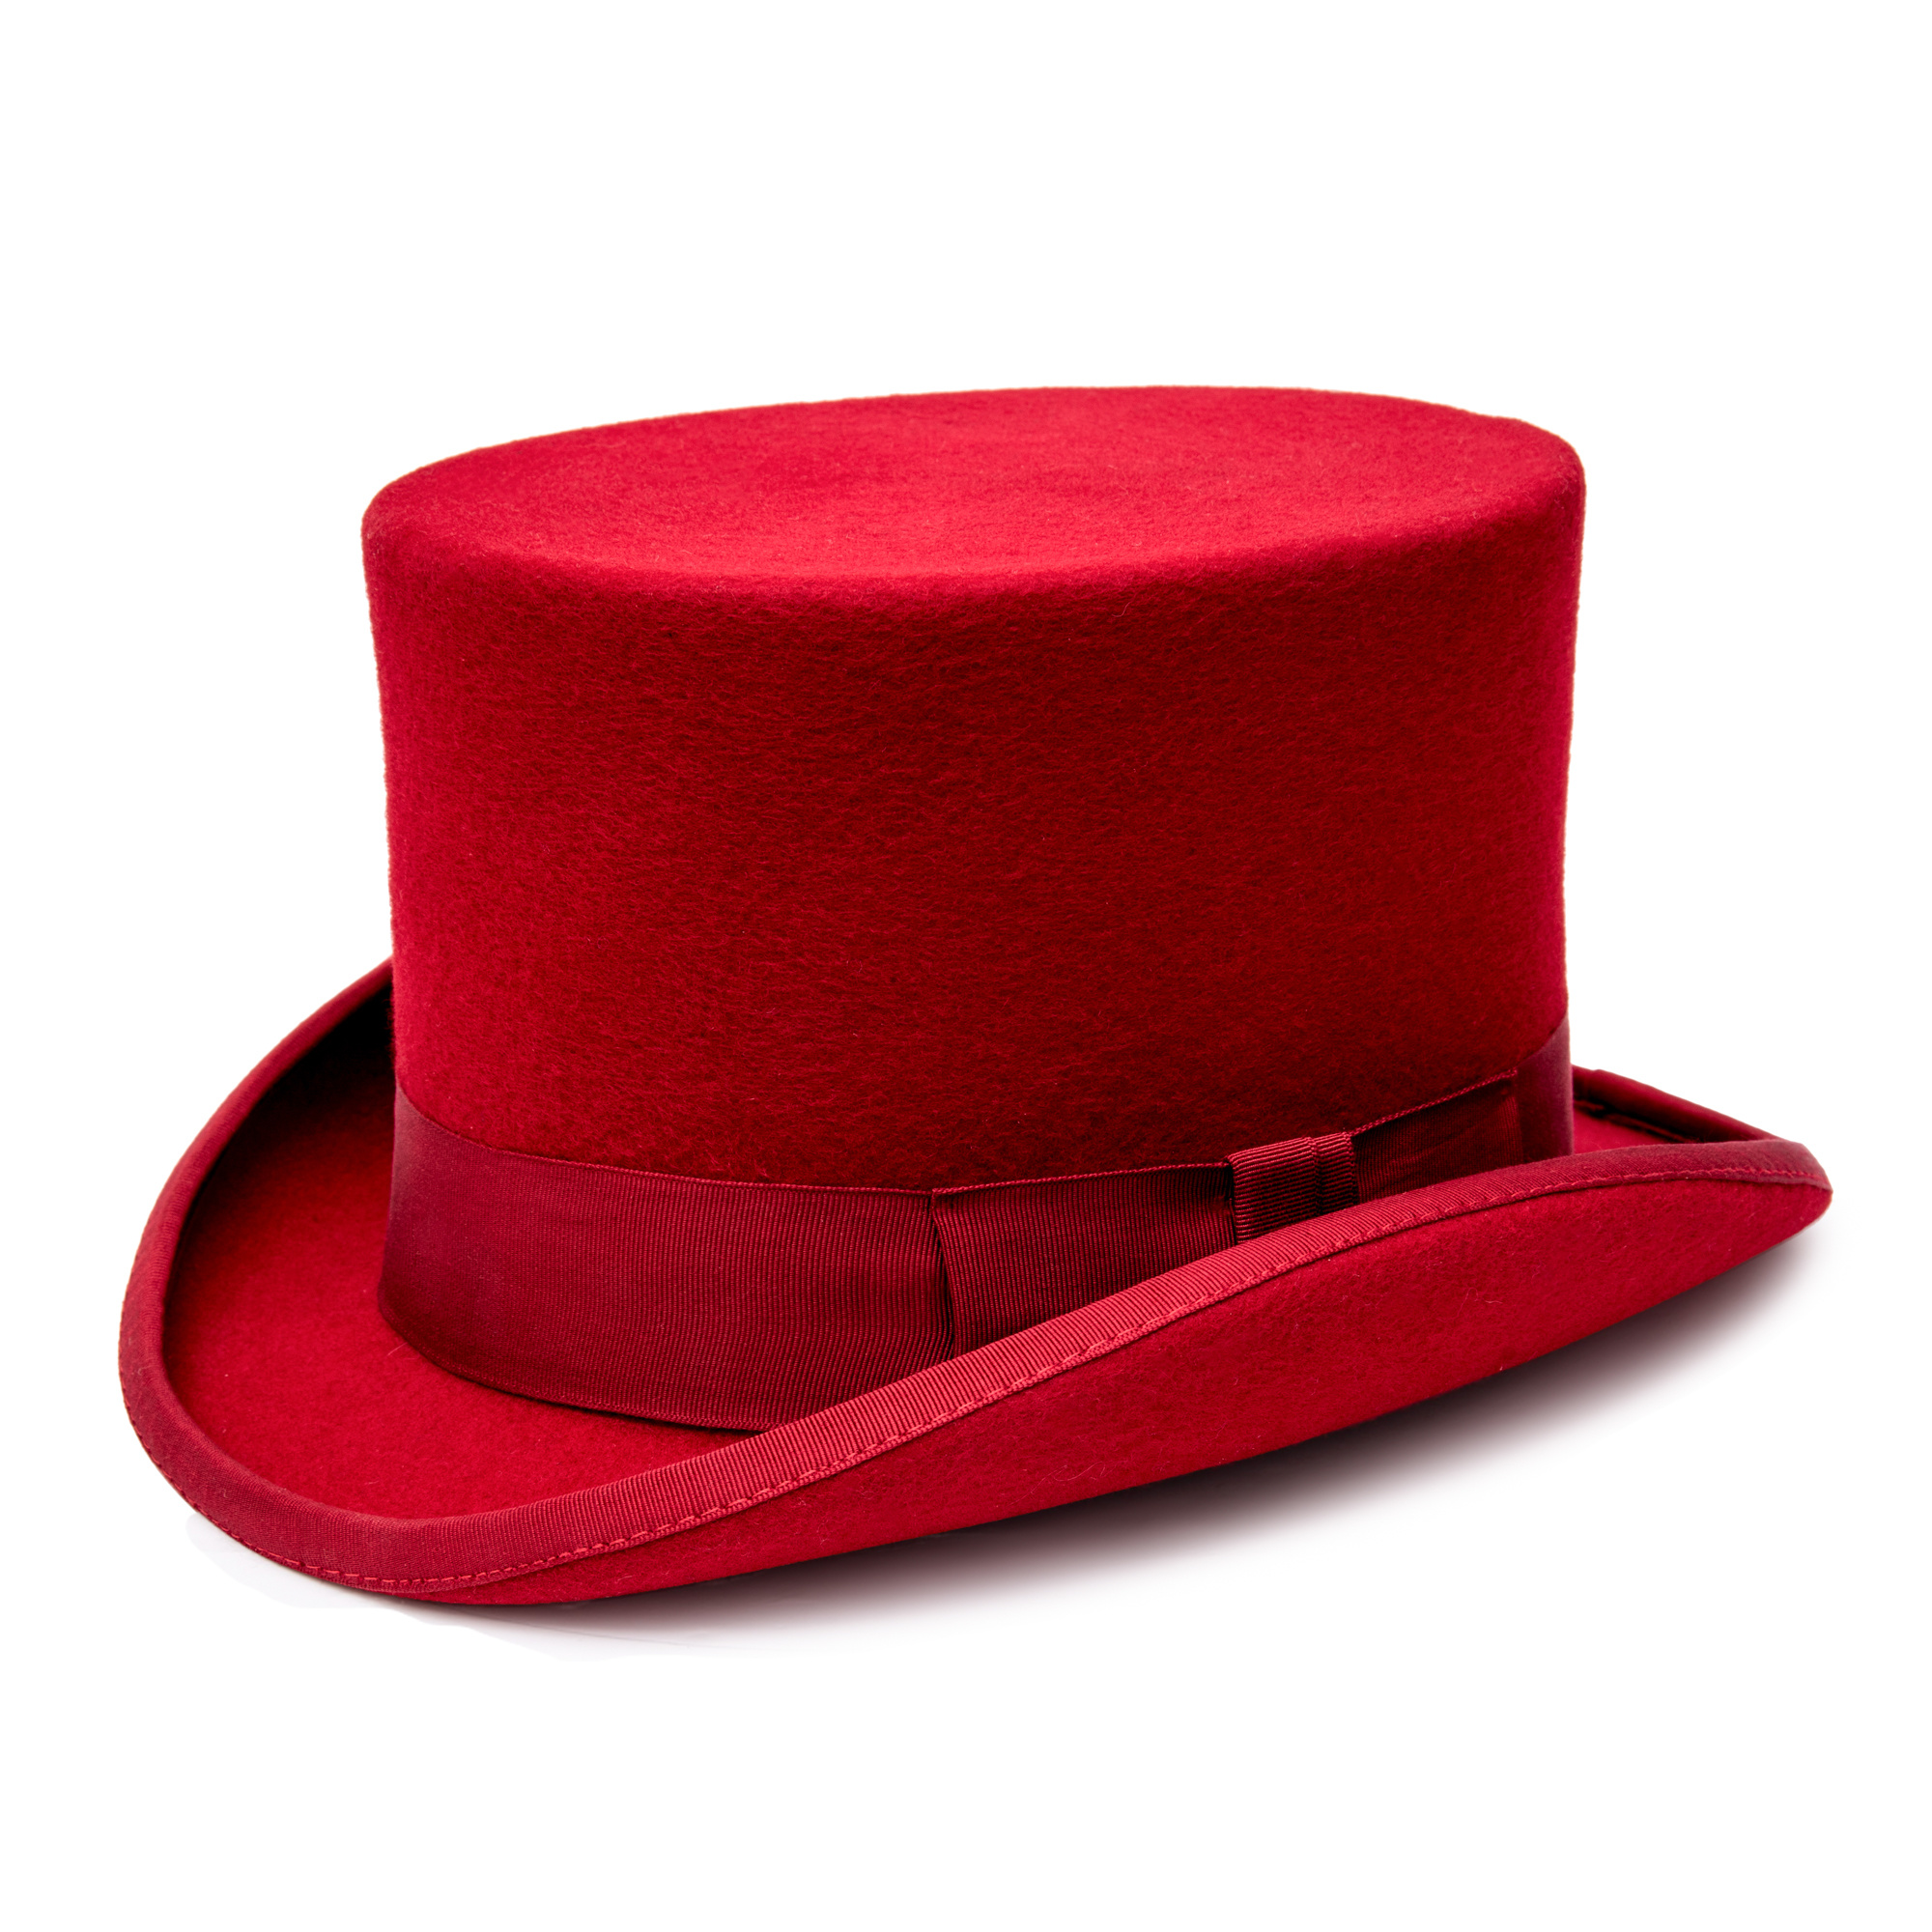 Wool Felt Top Hat CHRISTYS', Fast Shipping